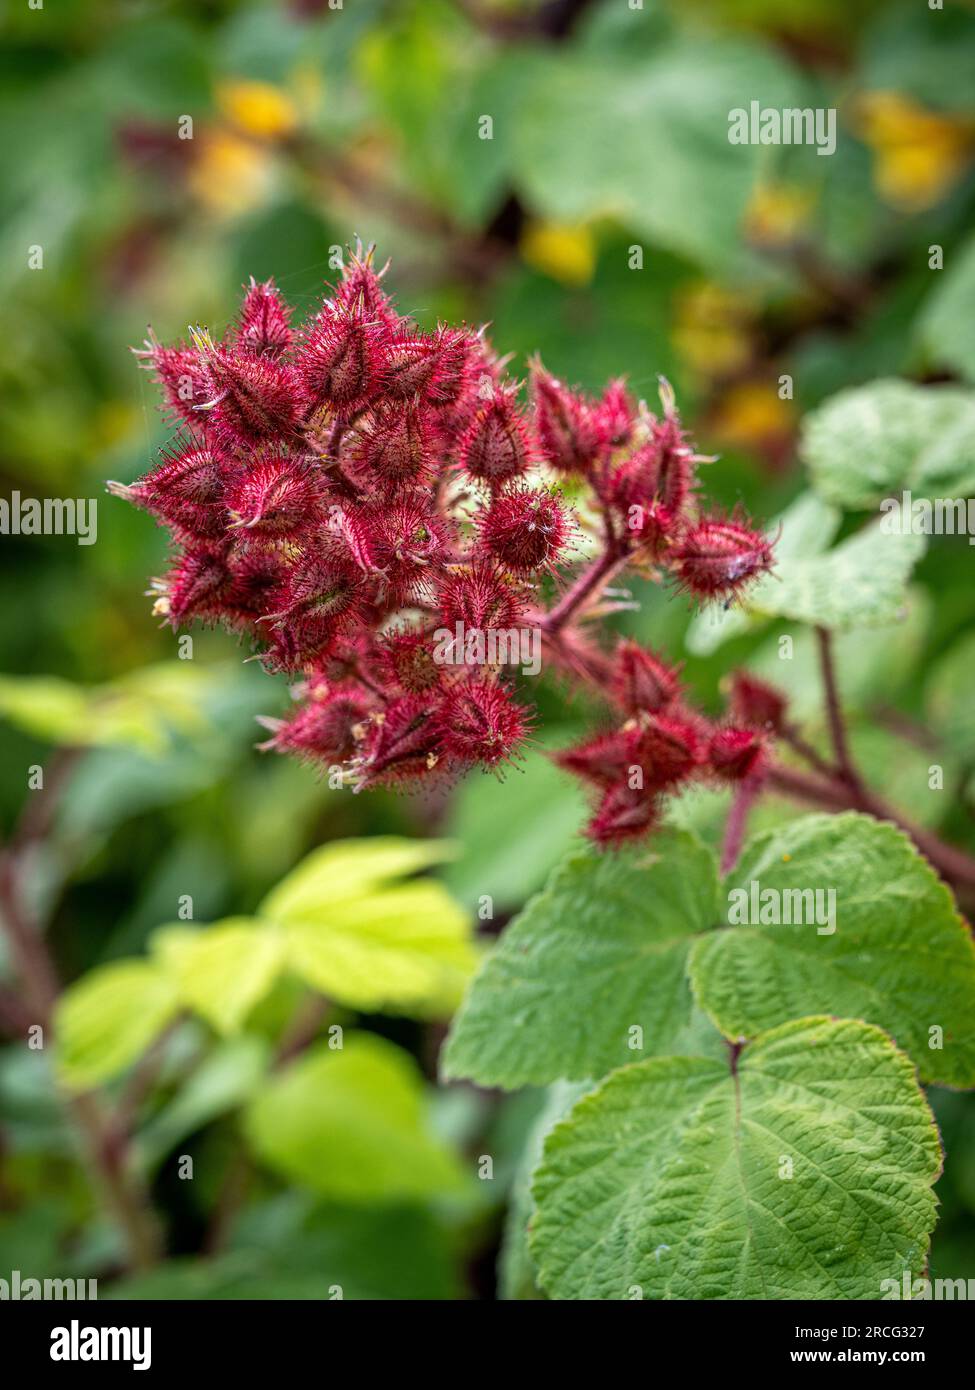 Young developing Japanese wineberry fruit covered by a hairy protective calyx, growing in a UK garden. Stock Photo